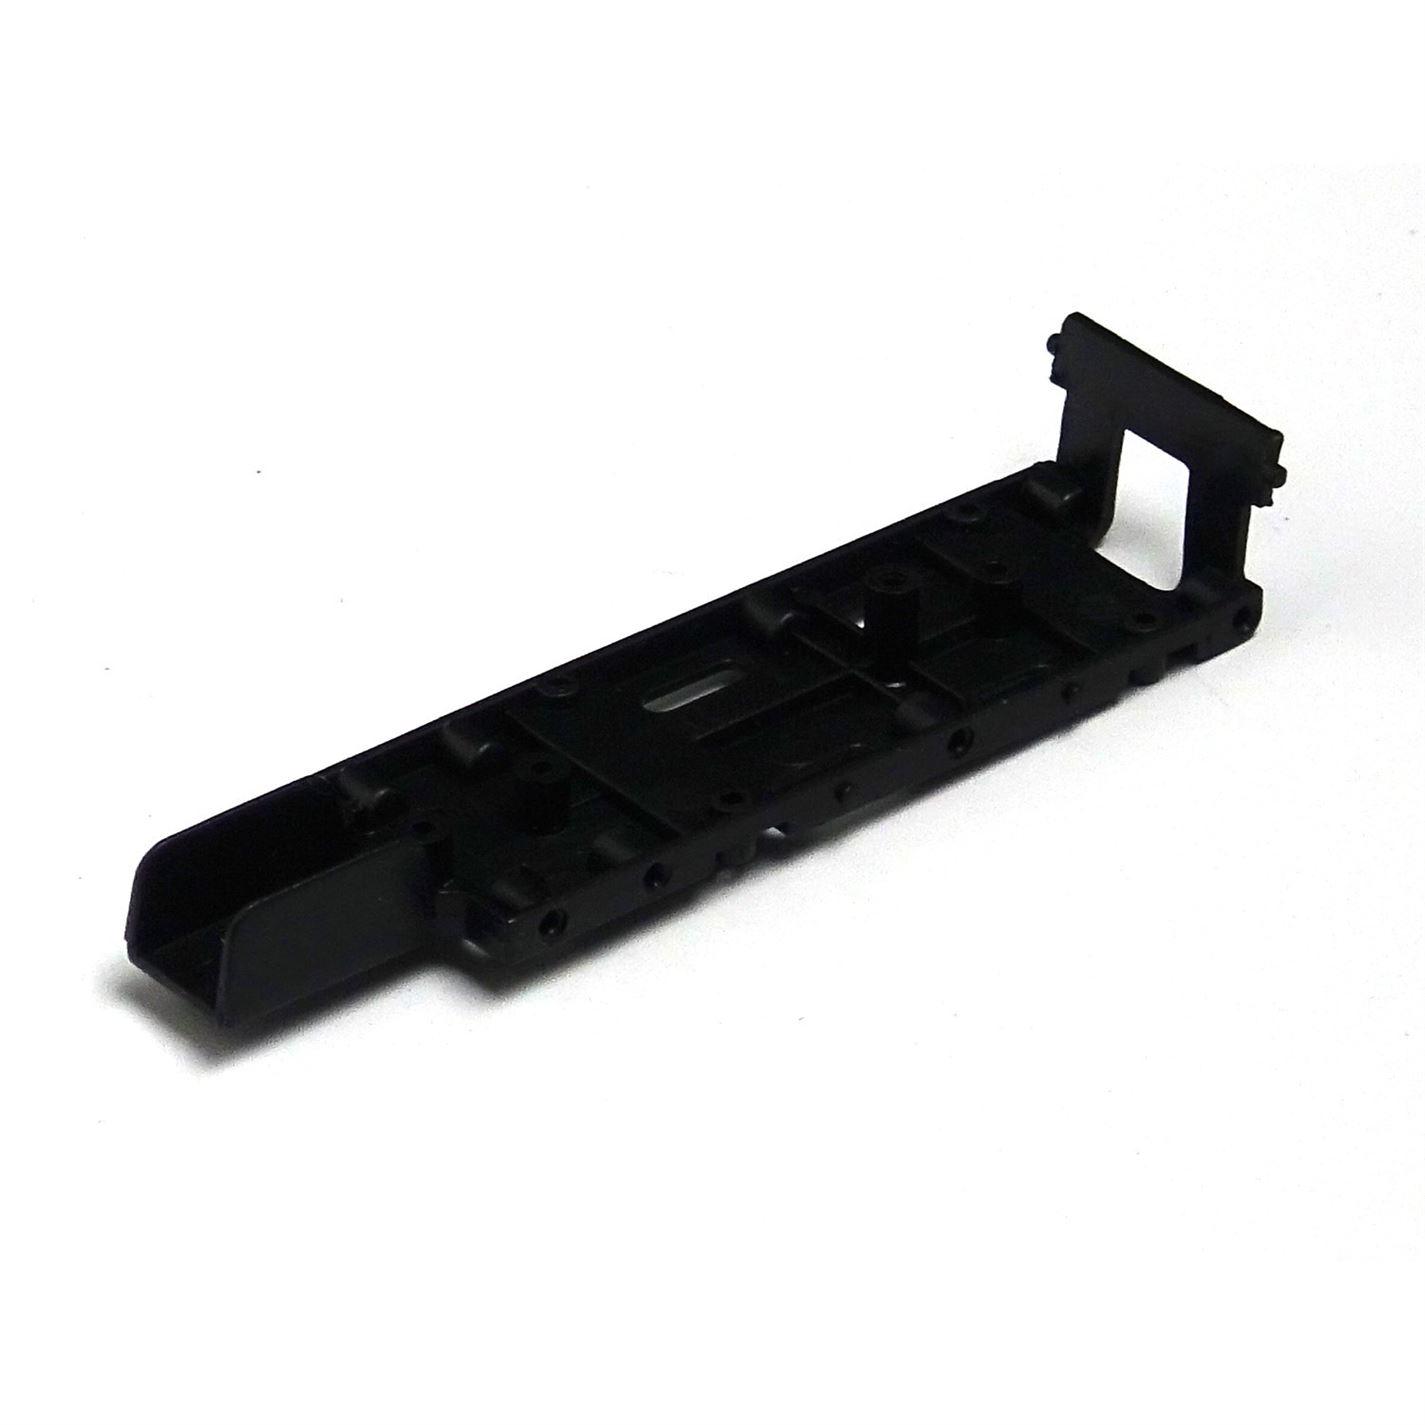 Avatar F103 Main Frame RC Helicopter Spare Parts F103-10 - UK Seller